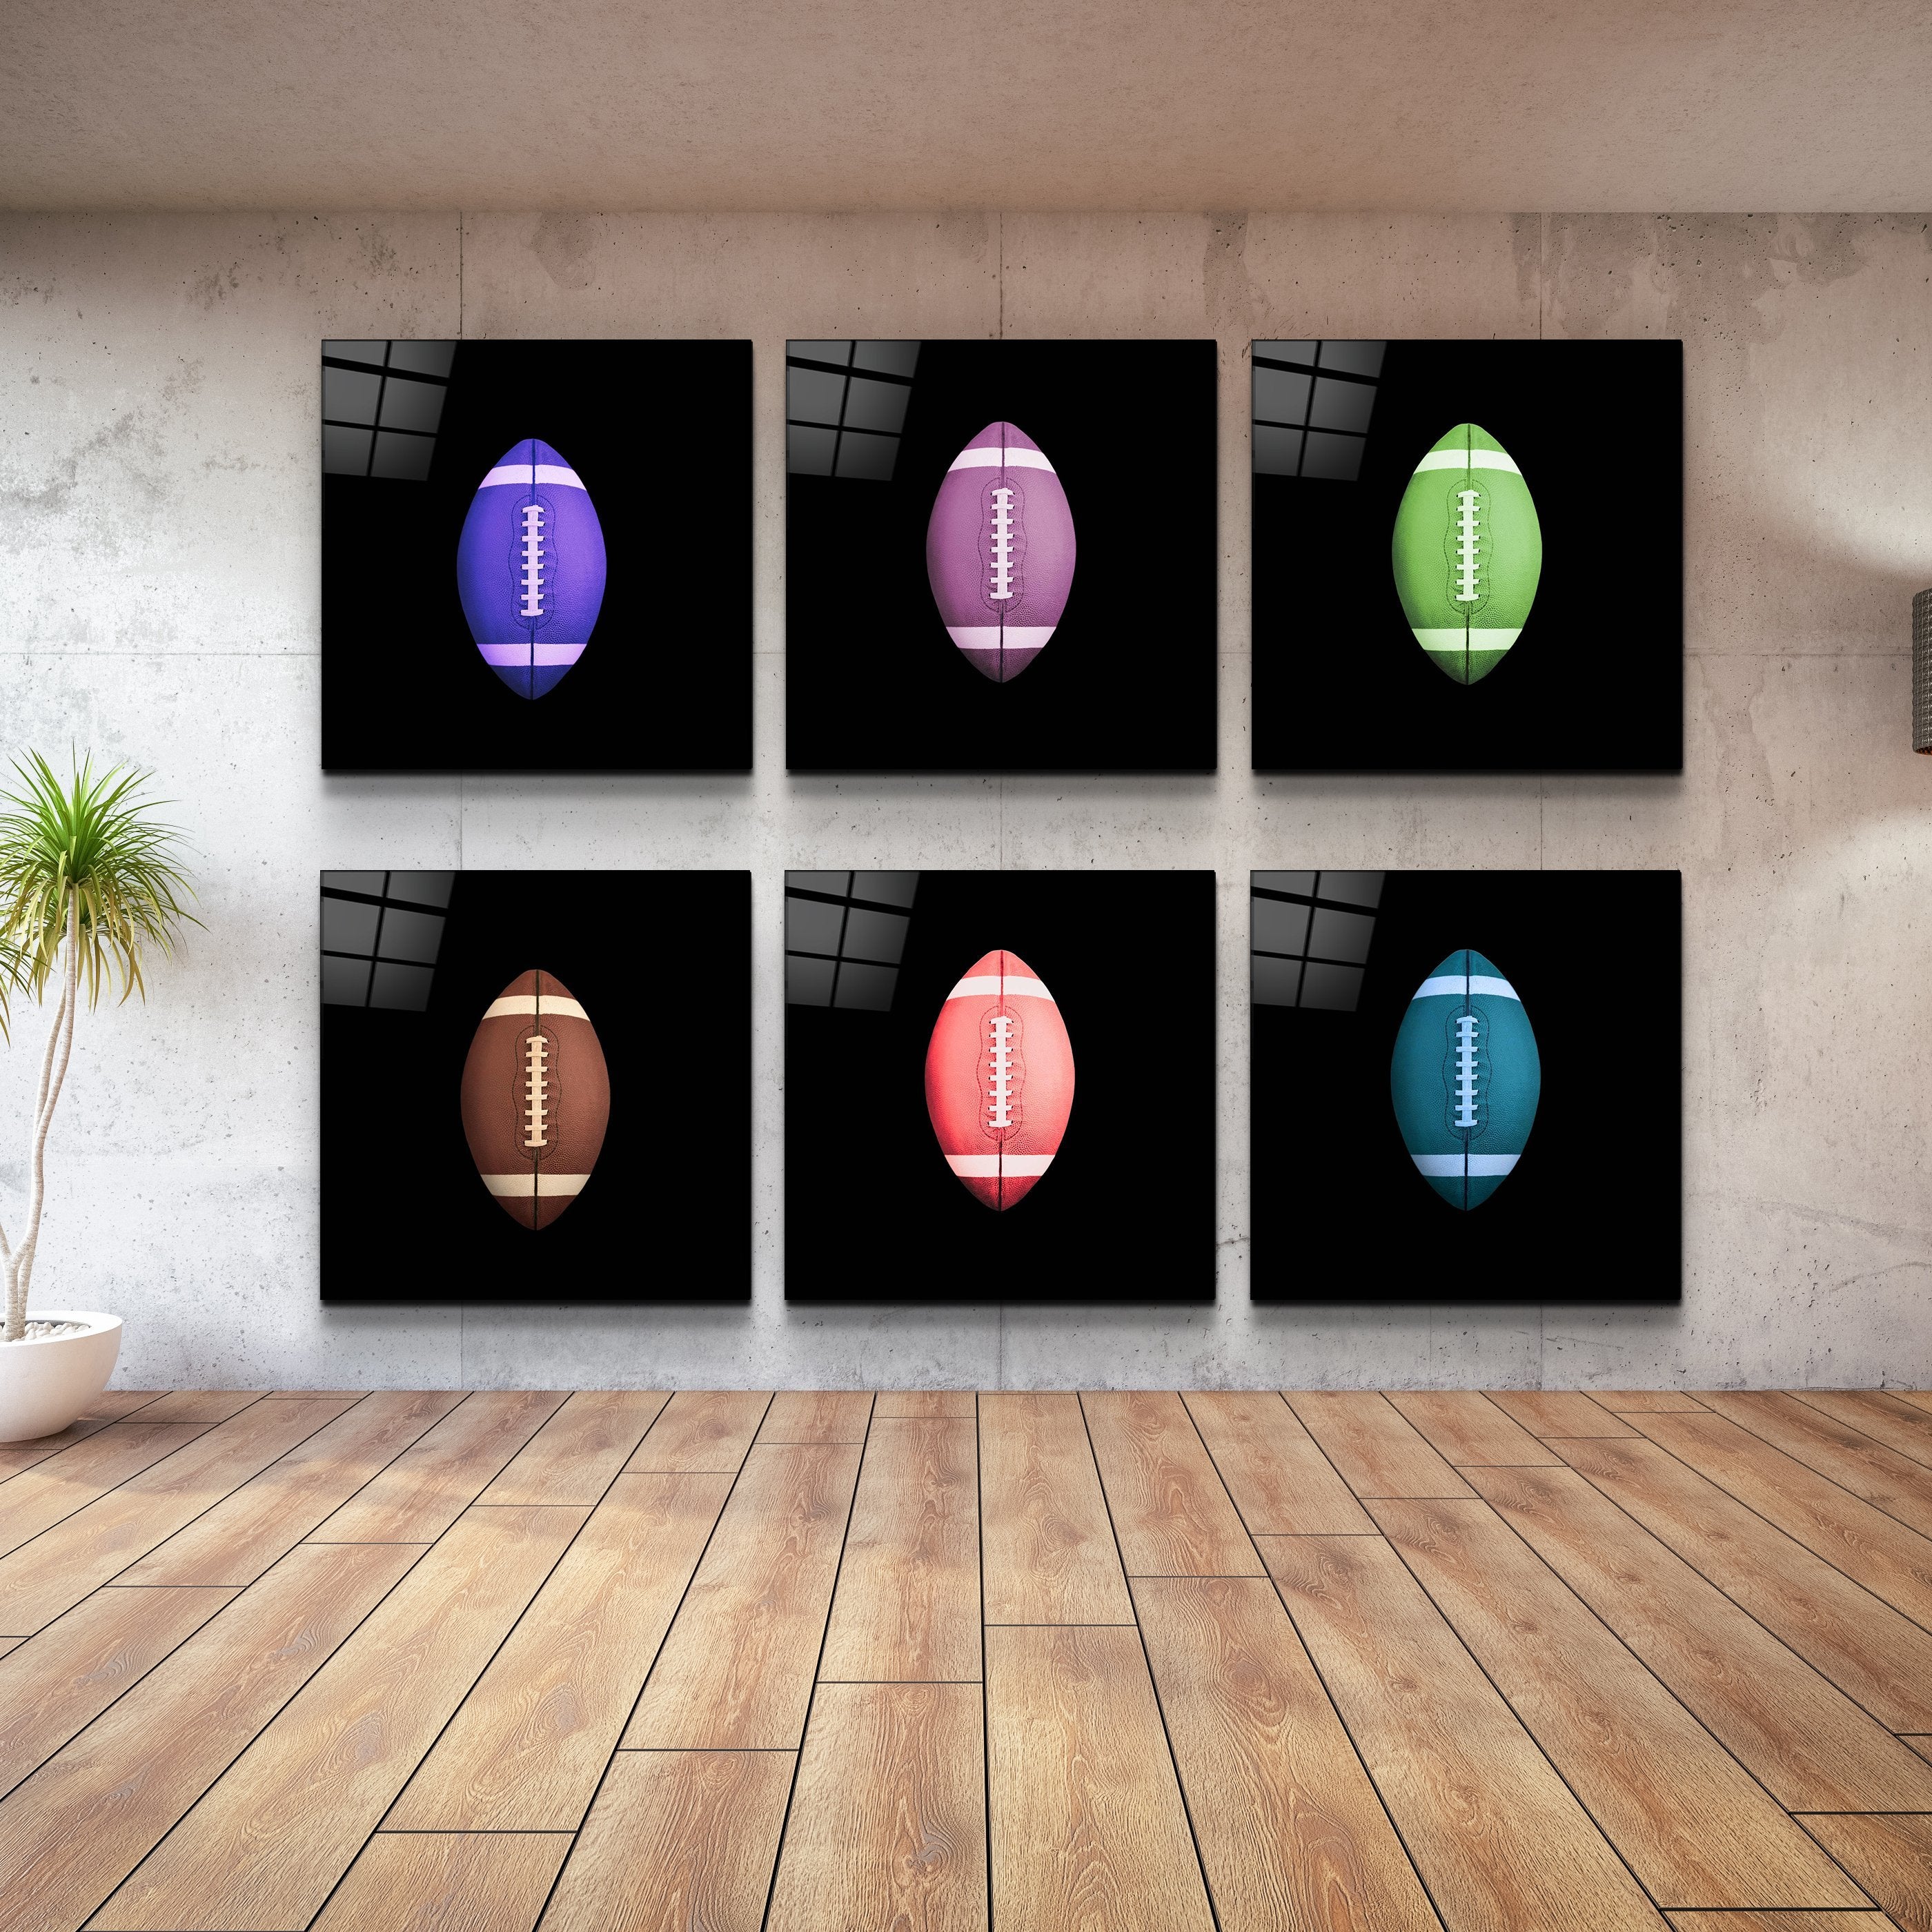 ."Recolored Designs - American Football". Glass Wall Art